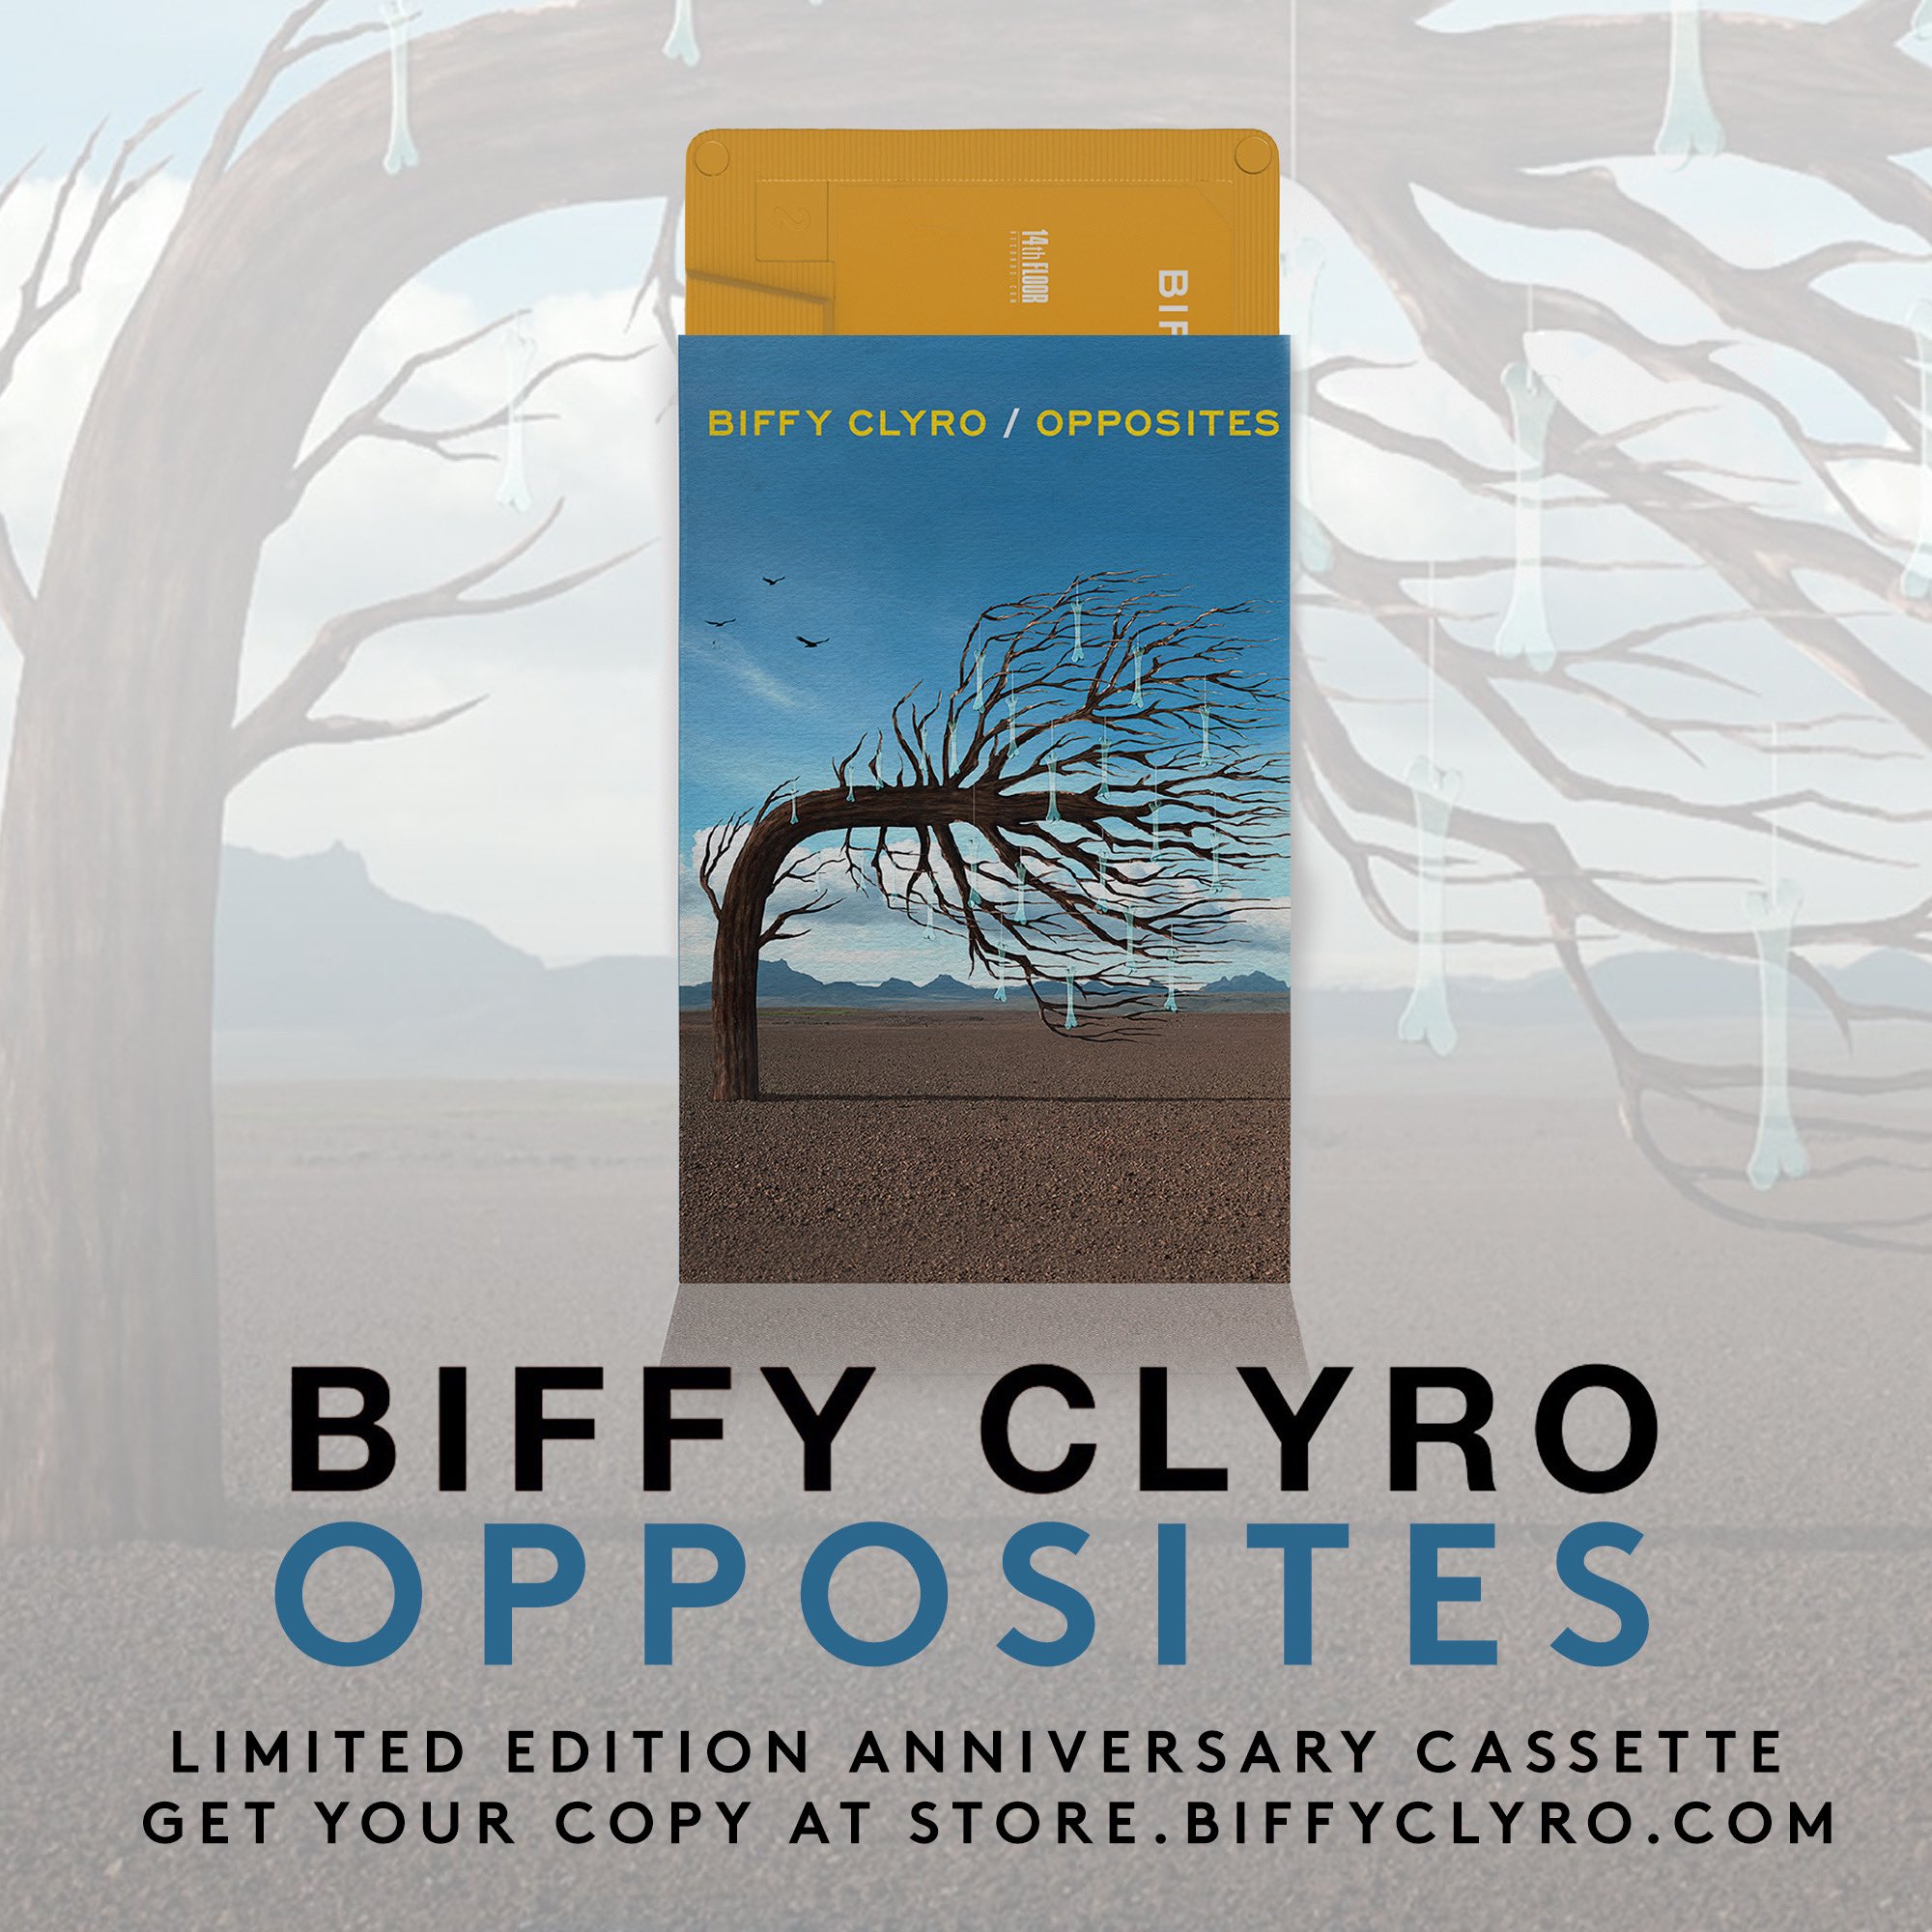 Biffy Clyro on "To celebrate 9 years since the release Opposites, we are releasing a limited edition cassette of the double album. Only 500 copies available, each one will be